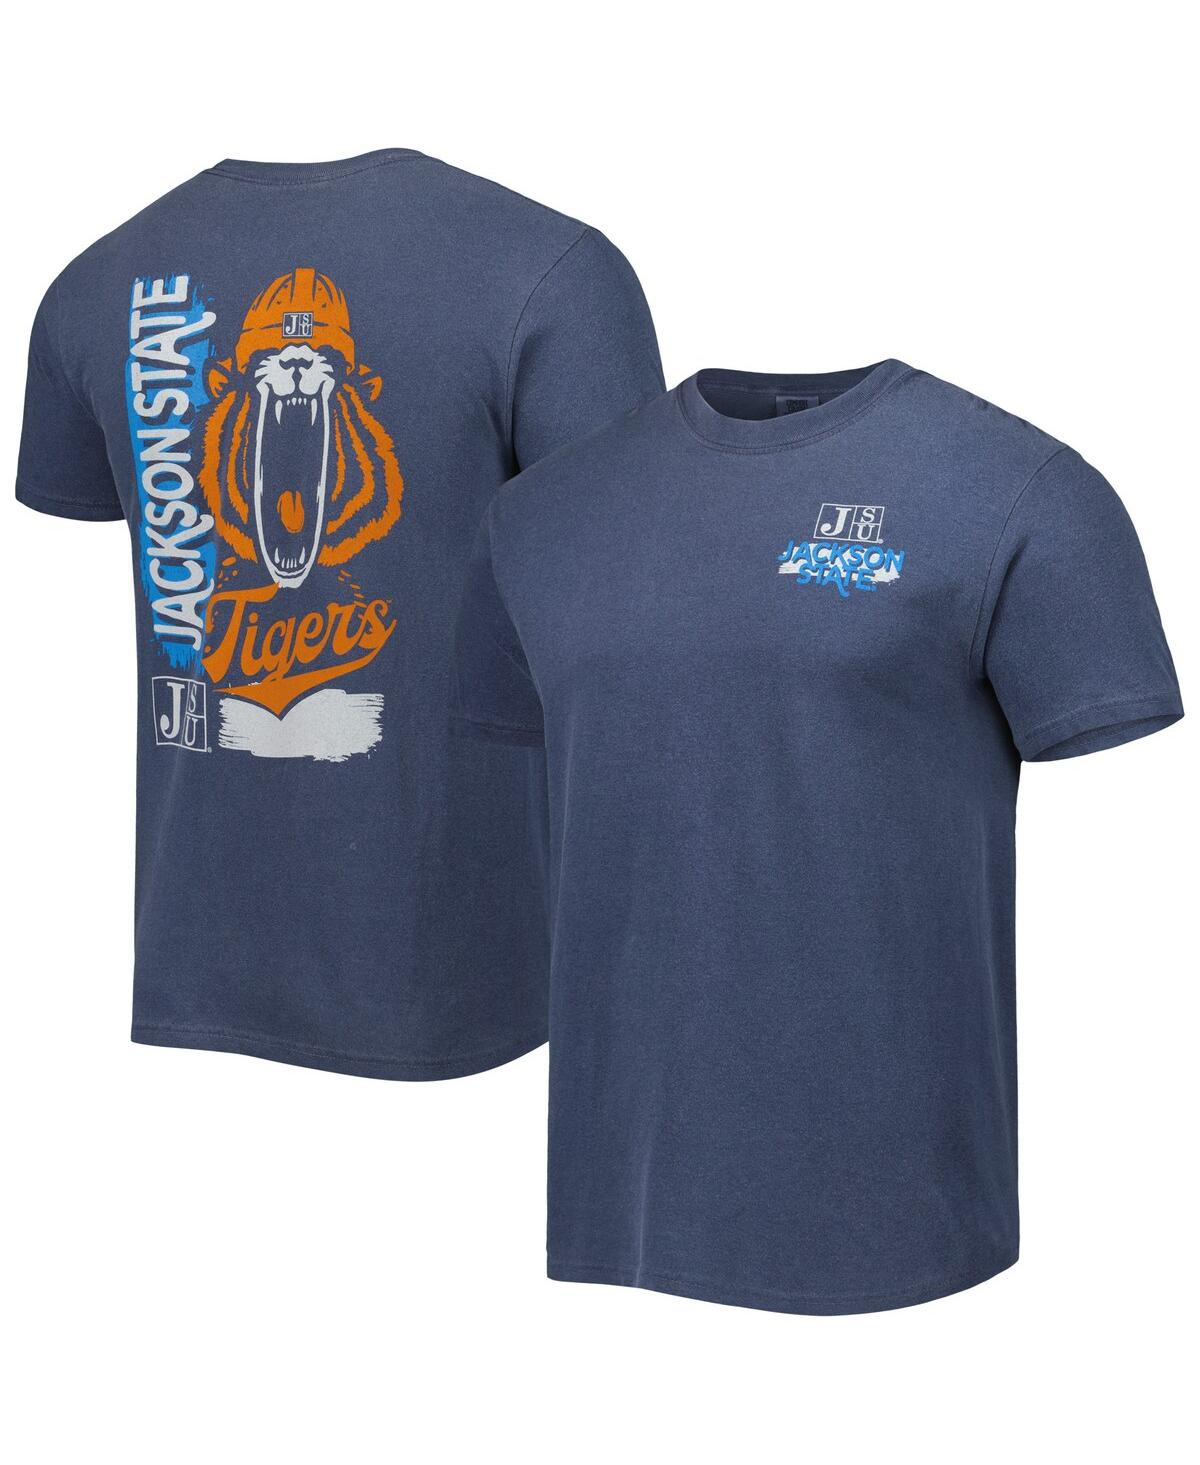 IMAGE ONE MEN'S NAVY JACKSON STATE TIGERS RETRO COMFORT COLOR T-SHIRT